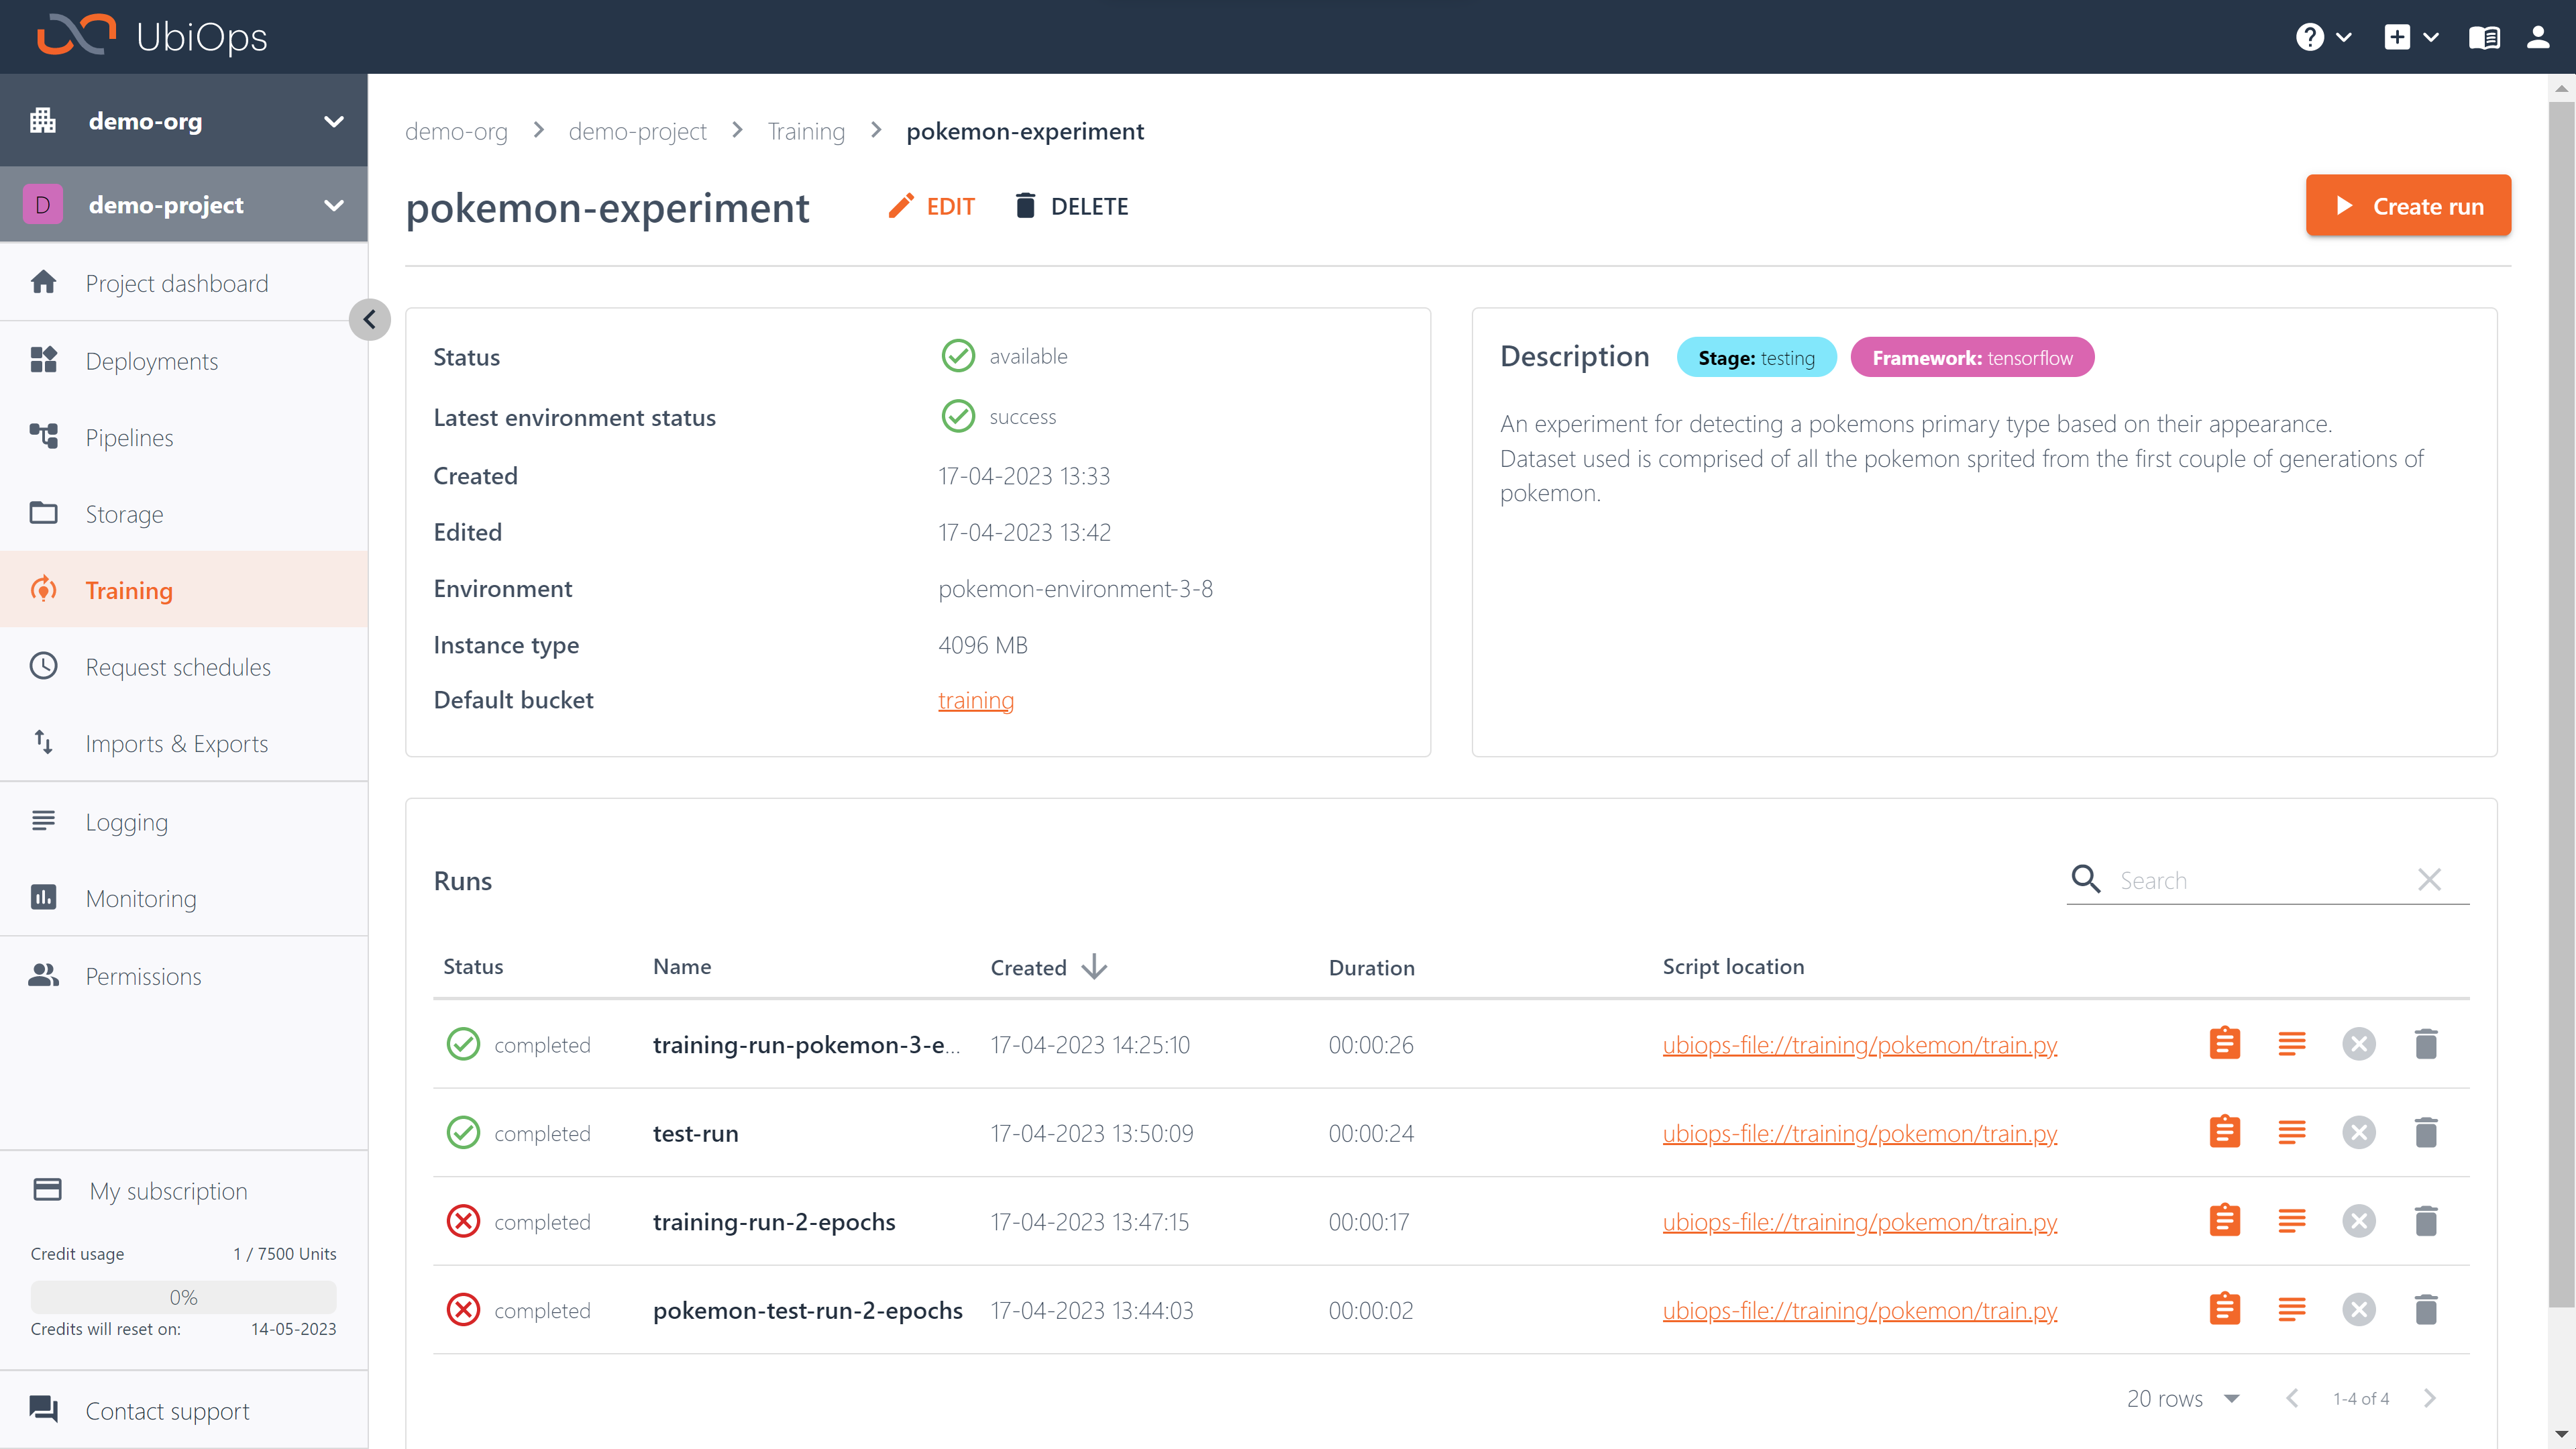 experiment_page UbiOps 2.23